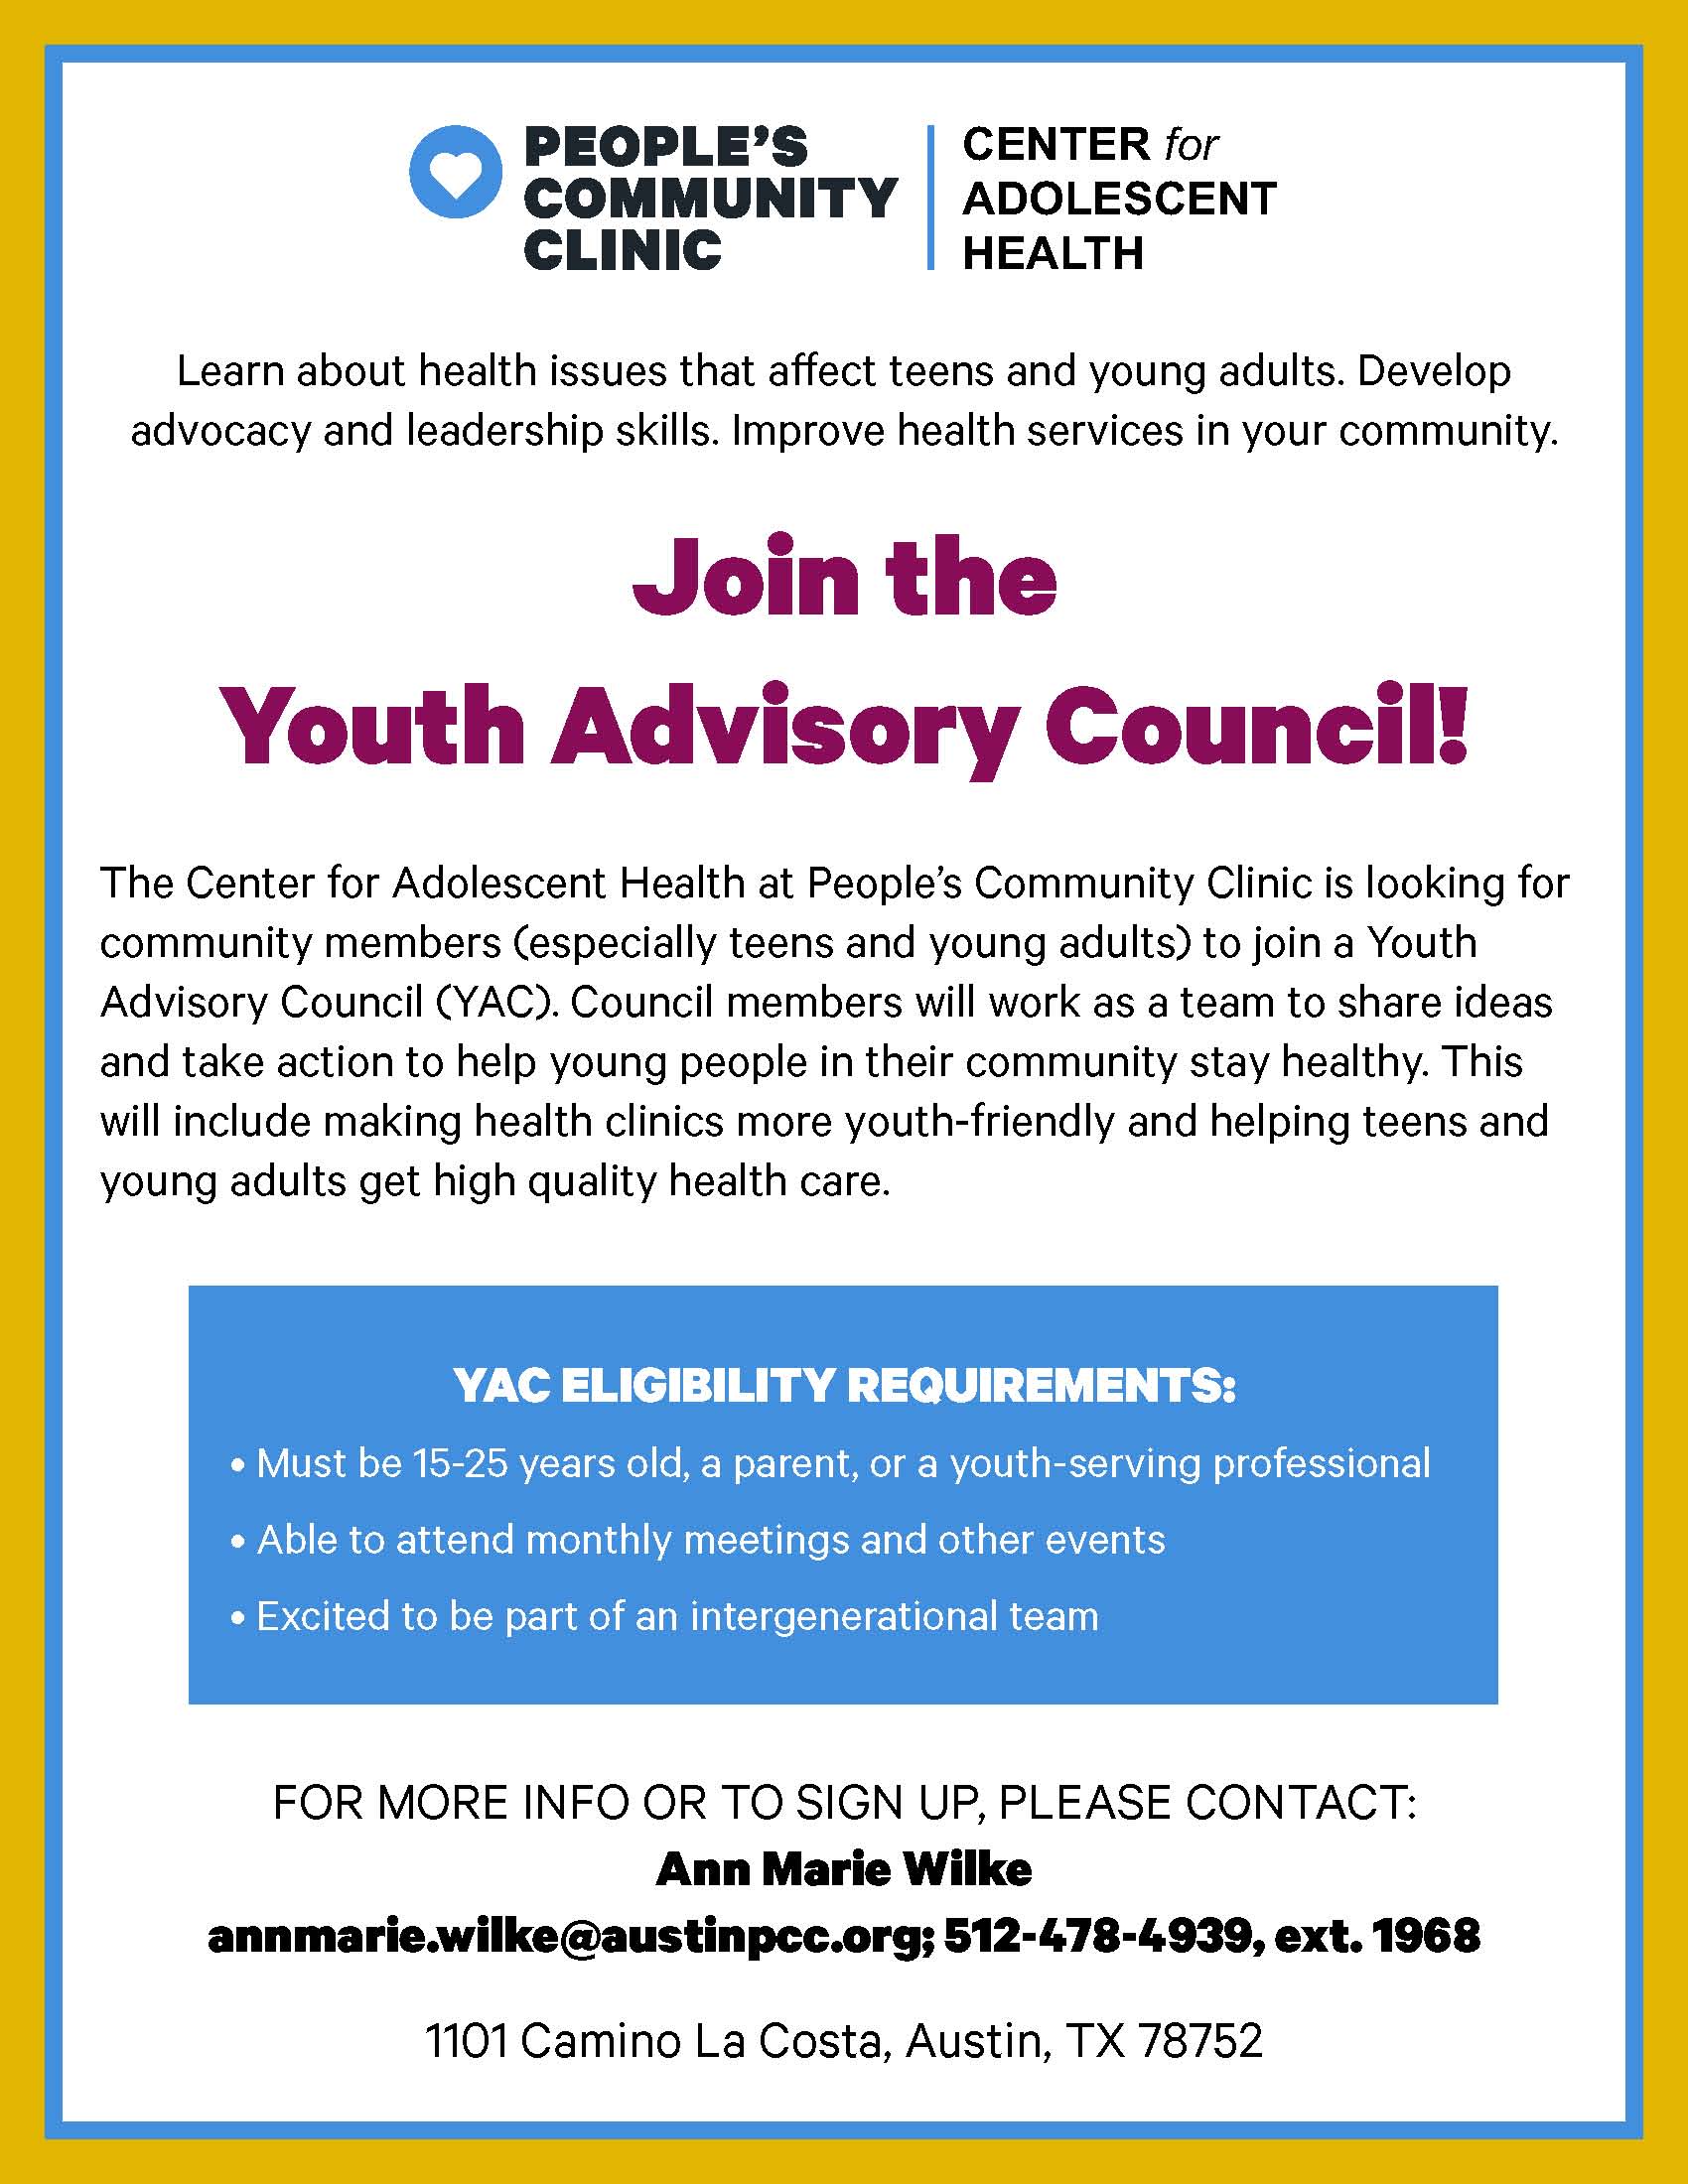 Youth Projects - Youth Enquiry Service